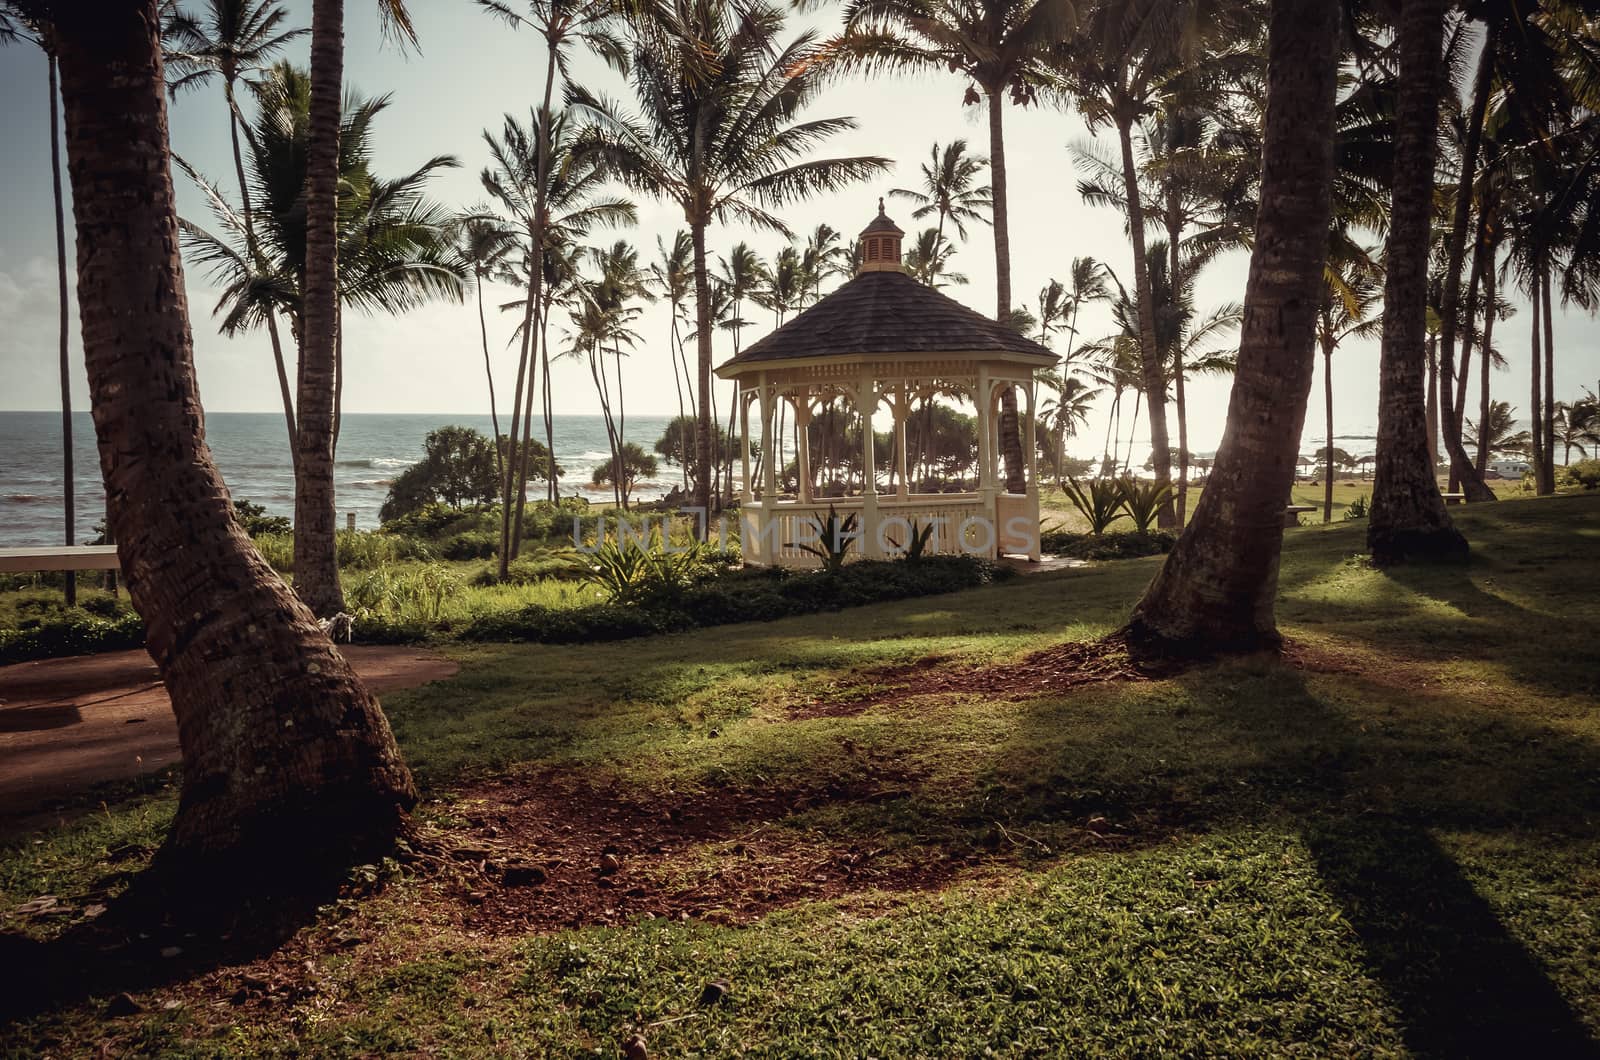 Wooden pavilion, palm trees, the sea and almost sunset in Kauai, by mikelju